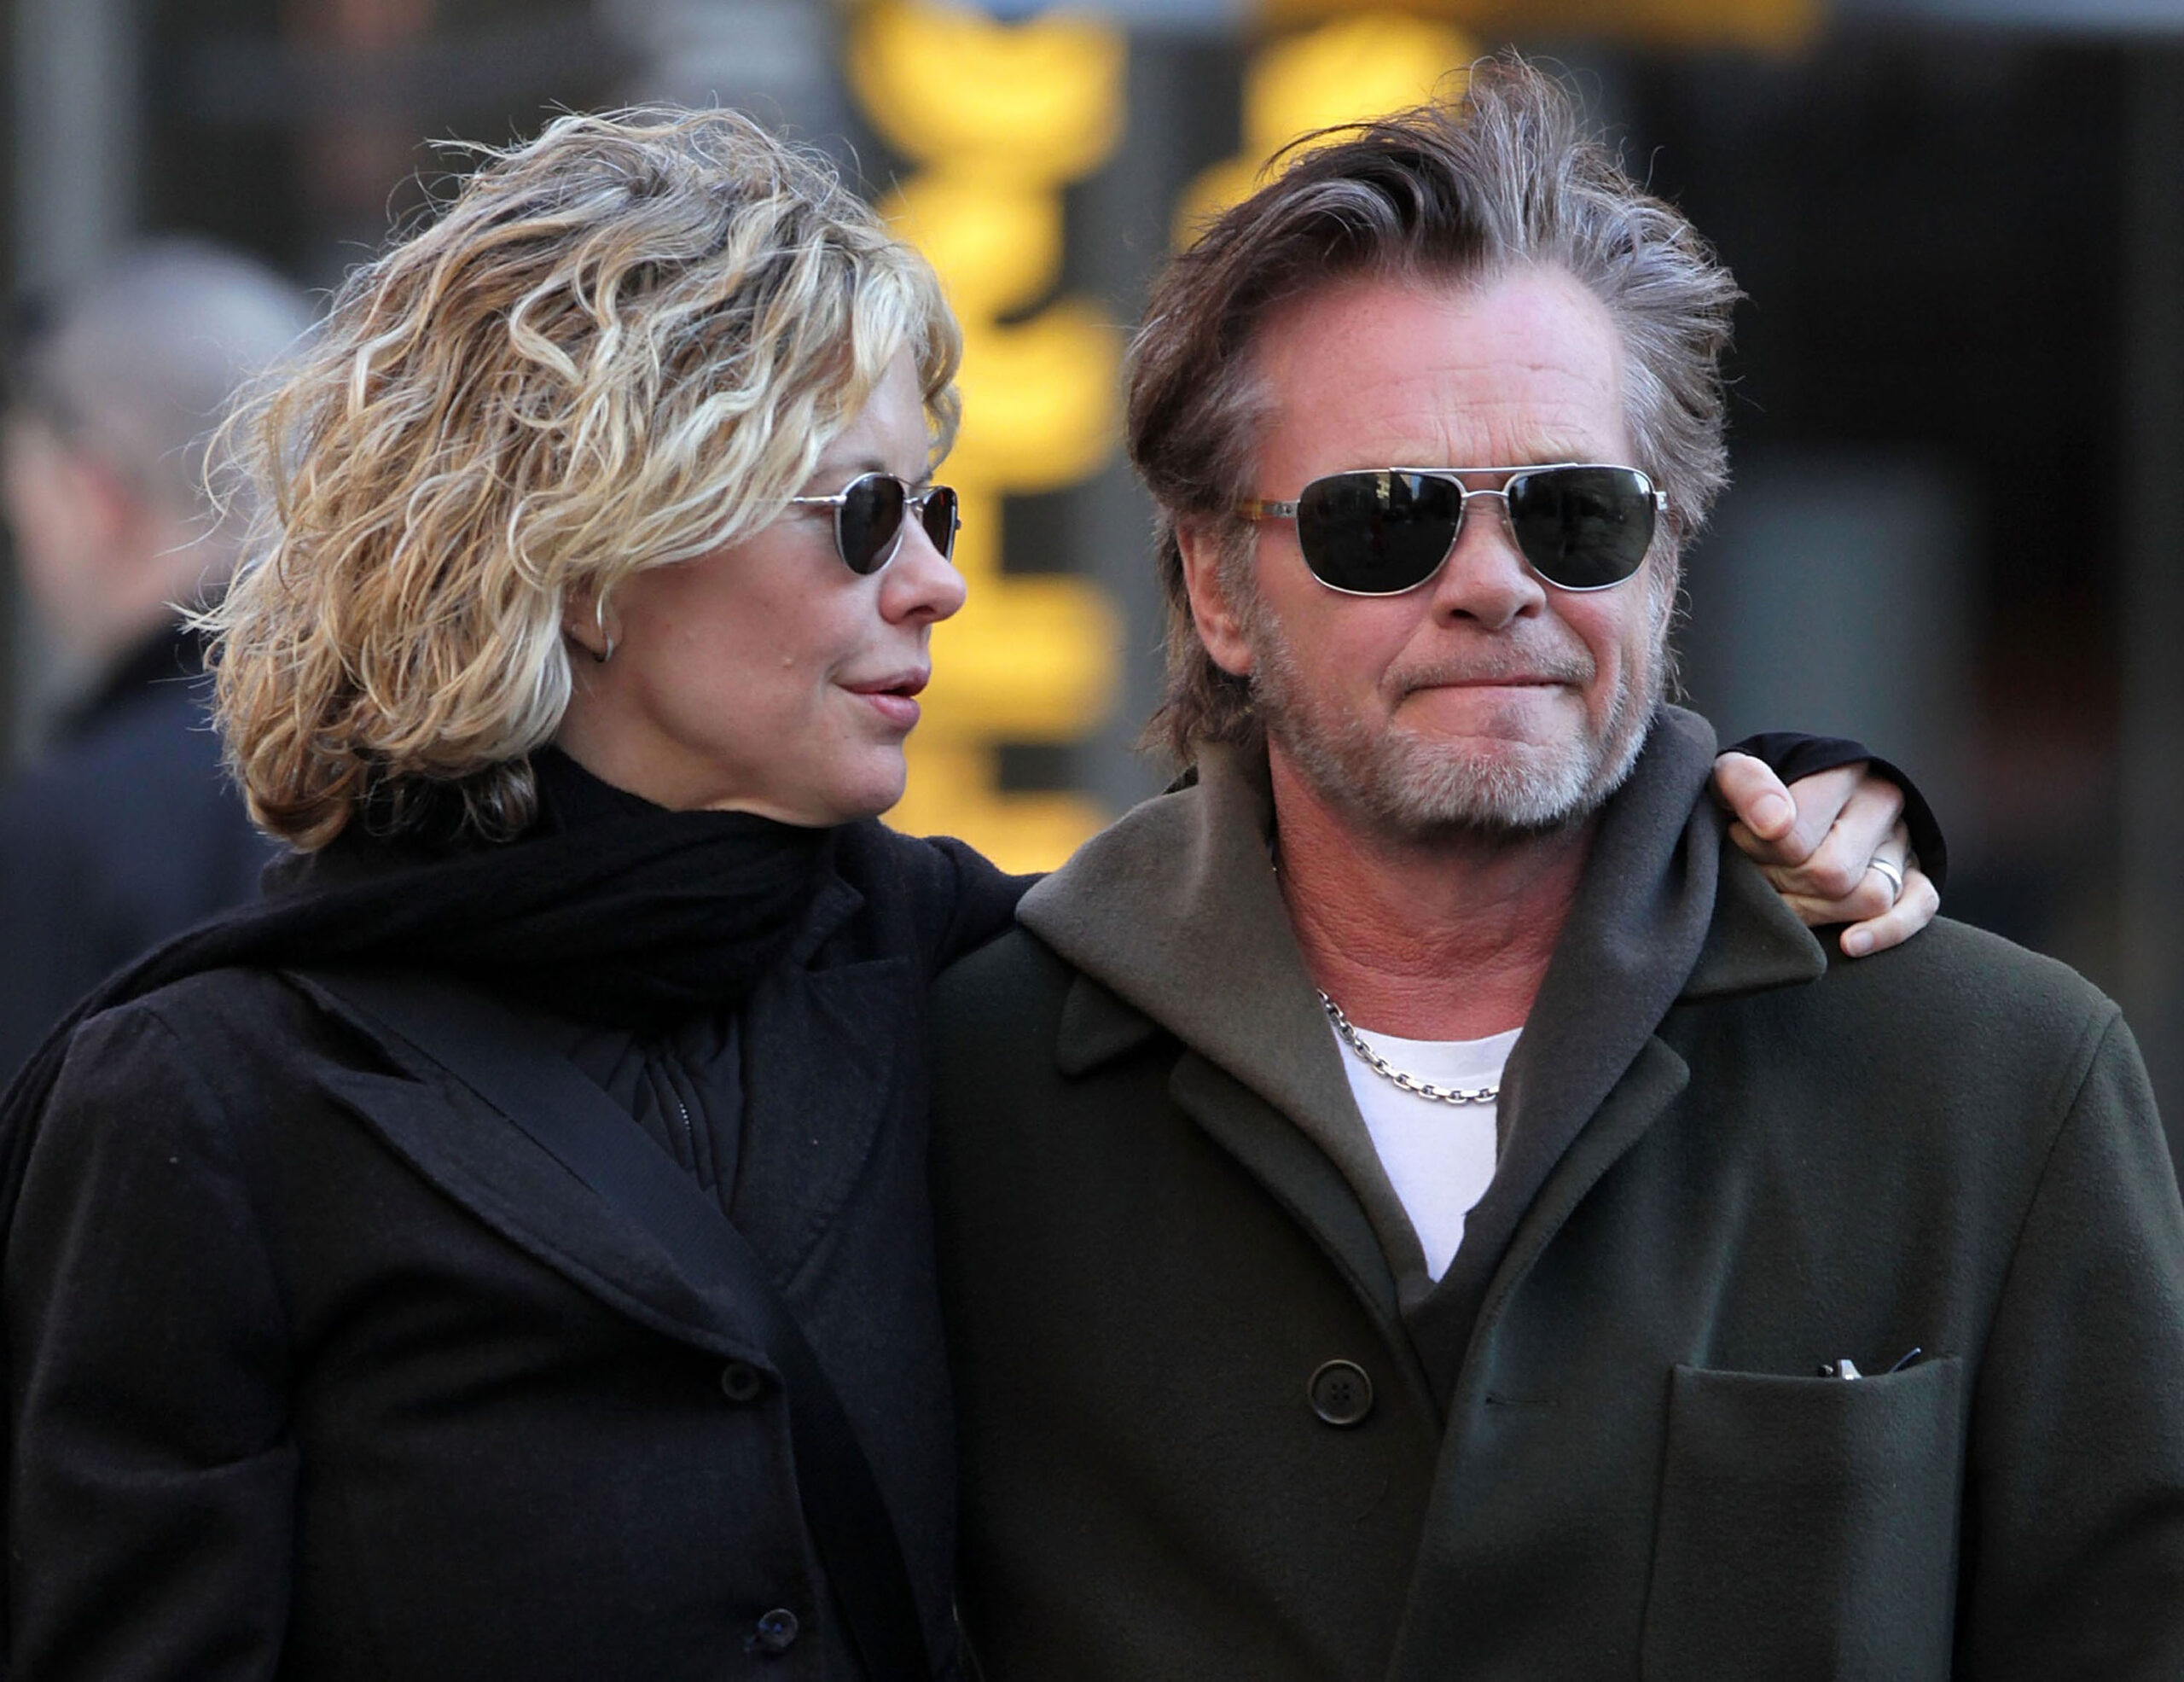 Meg Ryan and John Mellencamp on February 14, 2011, in New York City. | Source: Getty Images